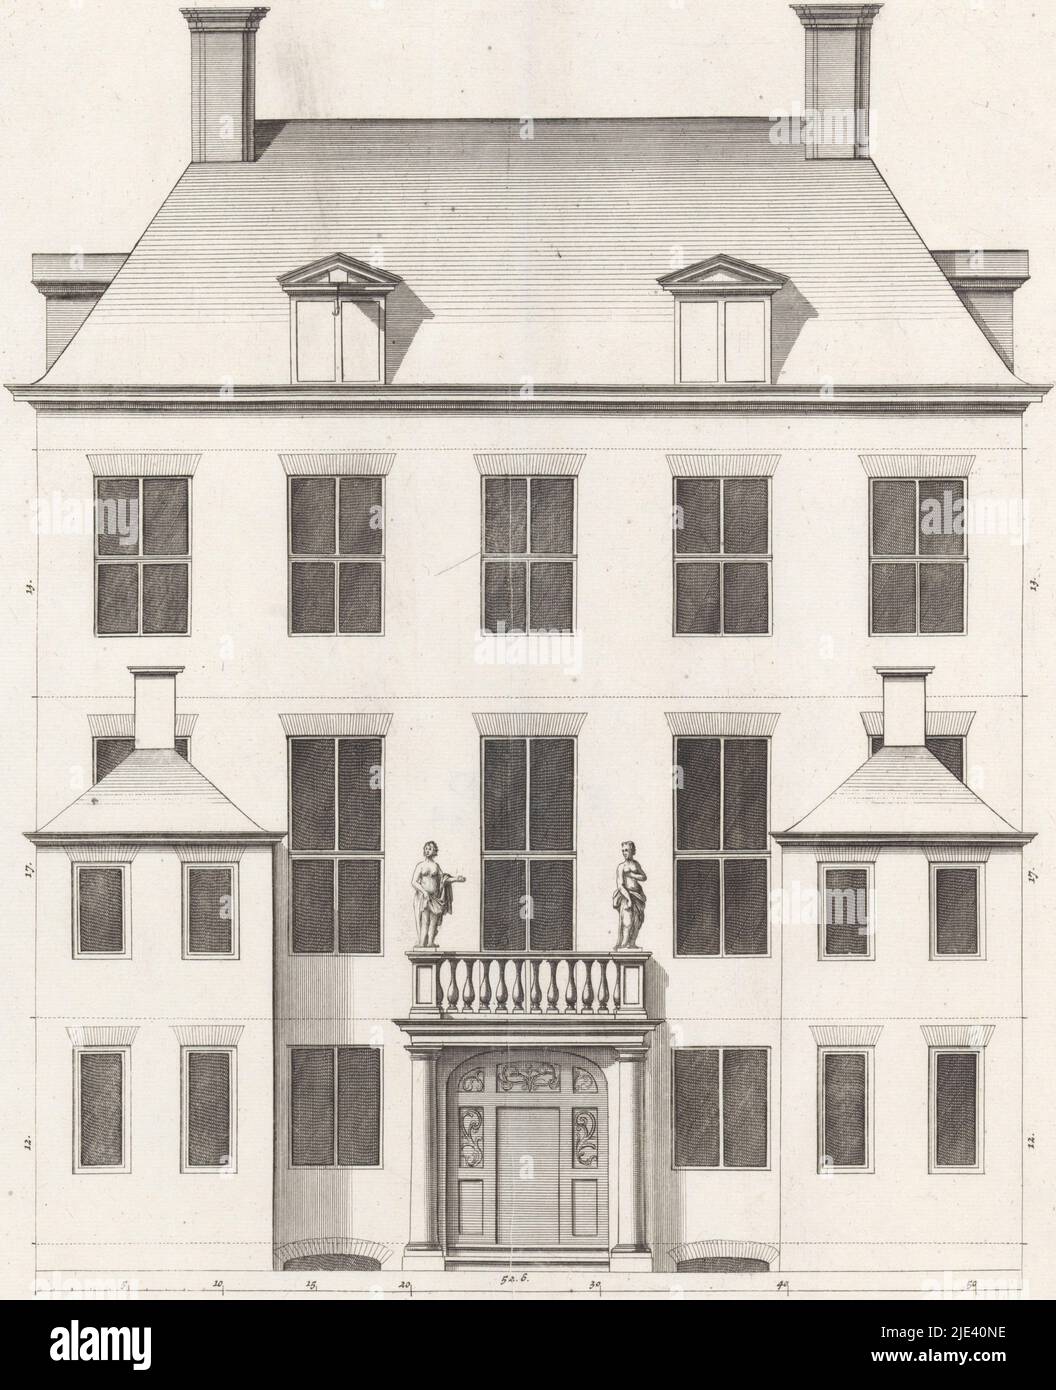 Back facade of a dwelling house on the Keizersgracht in Amsterdam, Bastiaen Stopendael, after Philips Vinckboons (II), 1674, Back facade of a dwelling house on the Keizersgracht in Amsterdam, built by Isaak Jan Nijs in 1664-1666. The house was designed by Philips Vingboons., print maker: Bastiaen Stopendael, (mentioned on object), Philips Vinckboons (II), (mentioned on object), Amsterdam, 1674, paper, etching, engraving, h 369 mm × w 290 mm Stock Photo